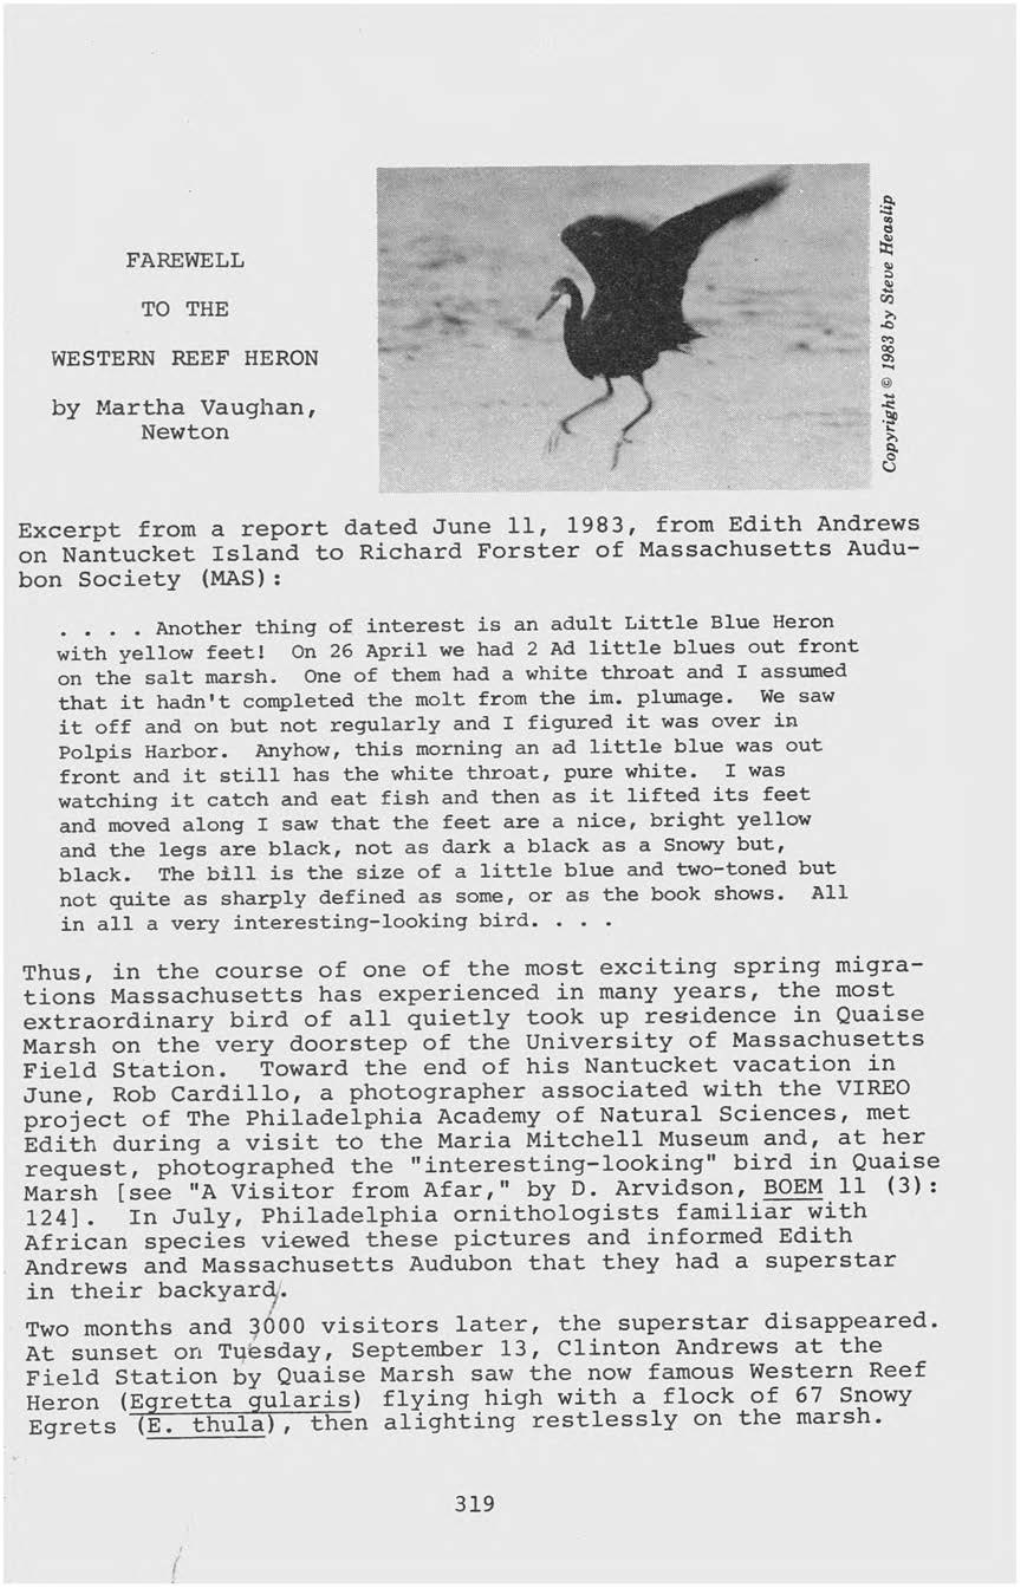 FAREWELL to the WESTERN REEF HERON by Martha Vaughan, Newton Excerpt from a Report Dated June 11, 1983, from Edith Andrews on Na